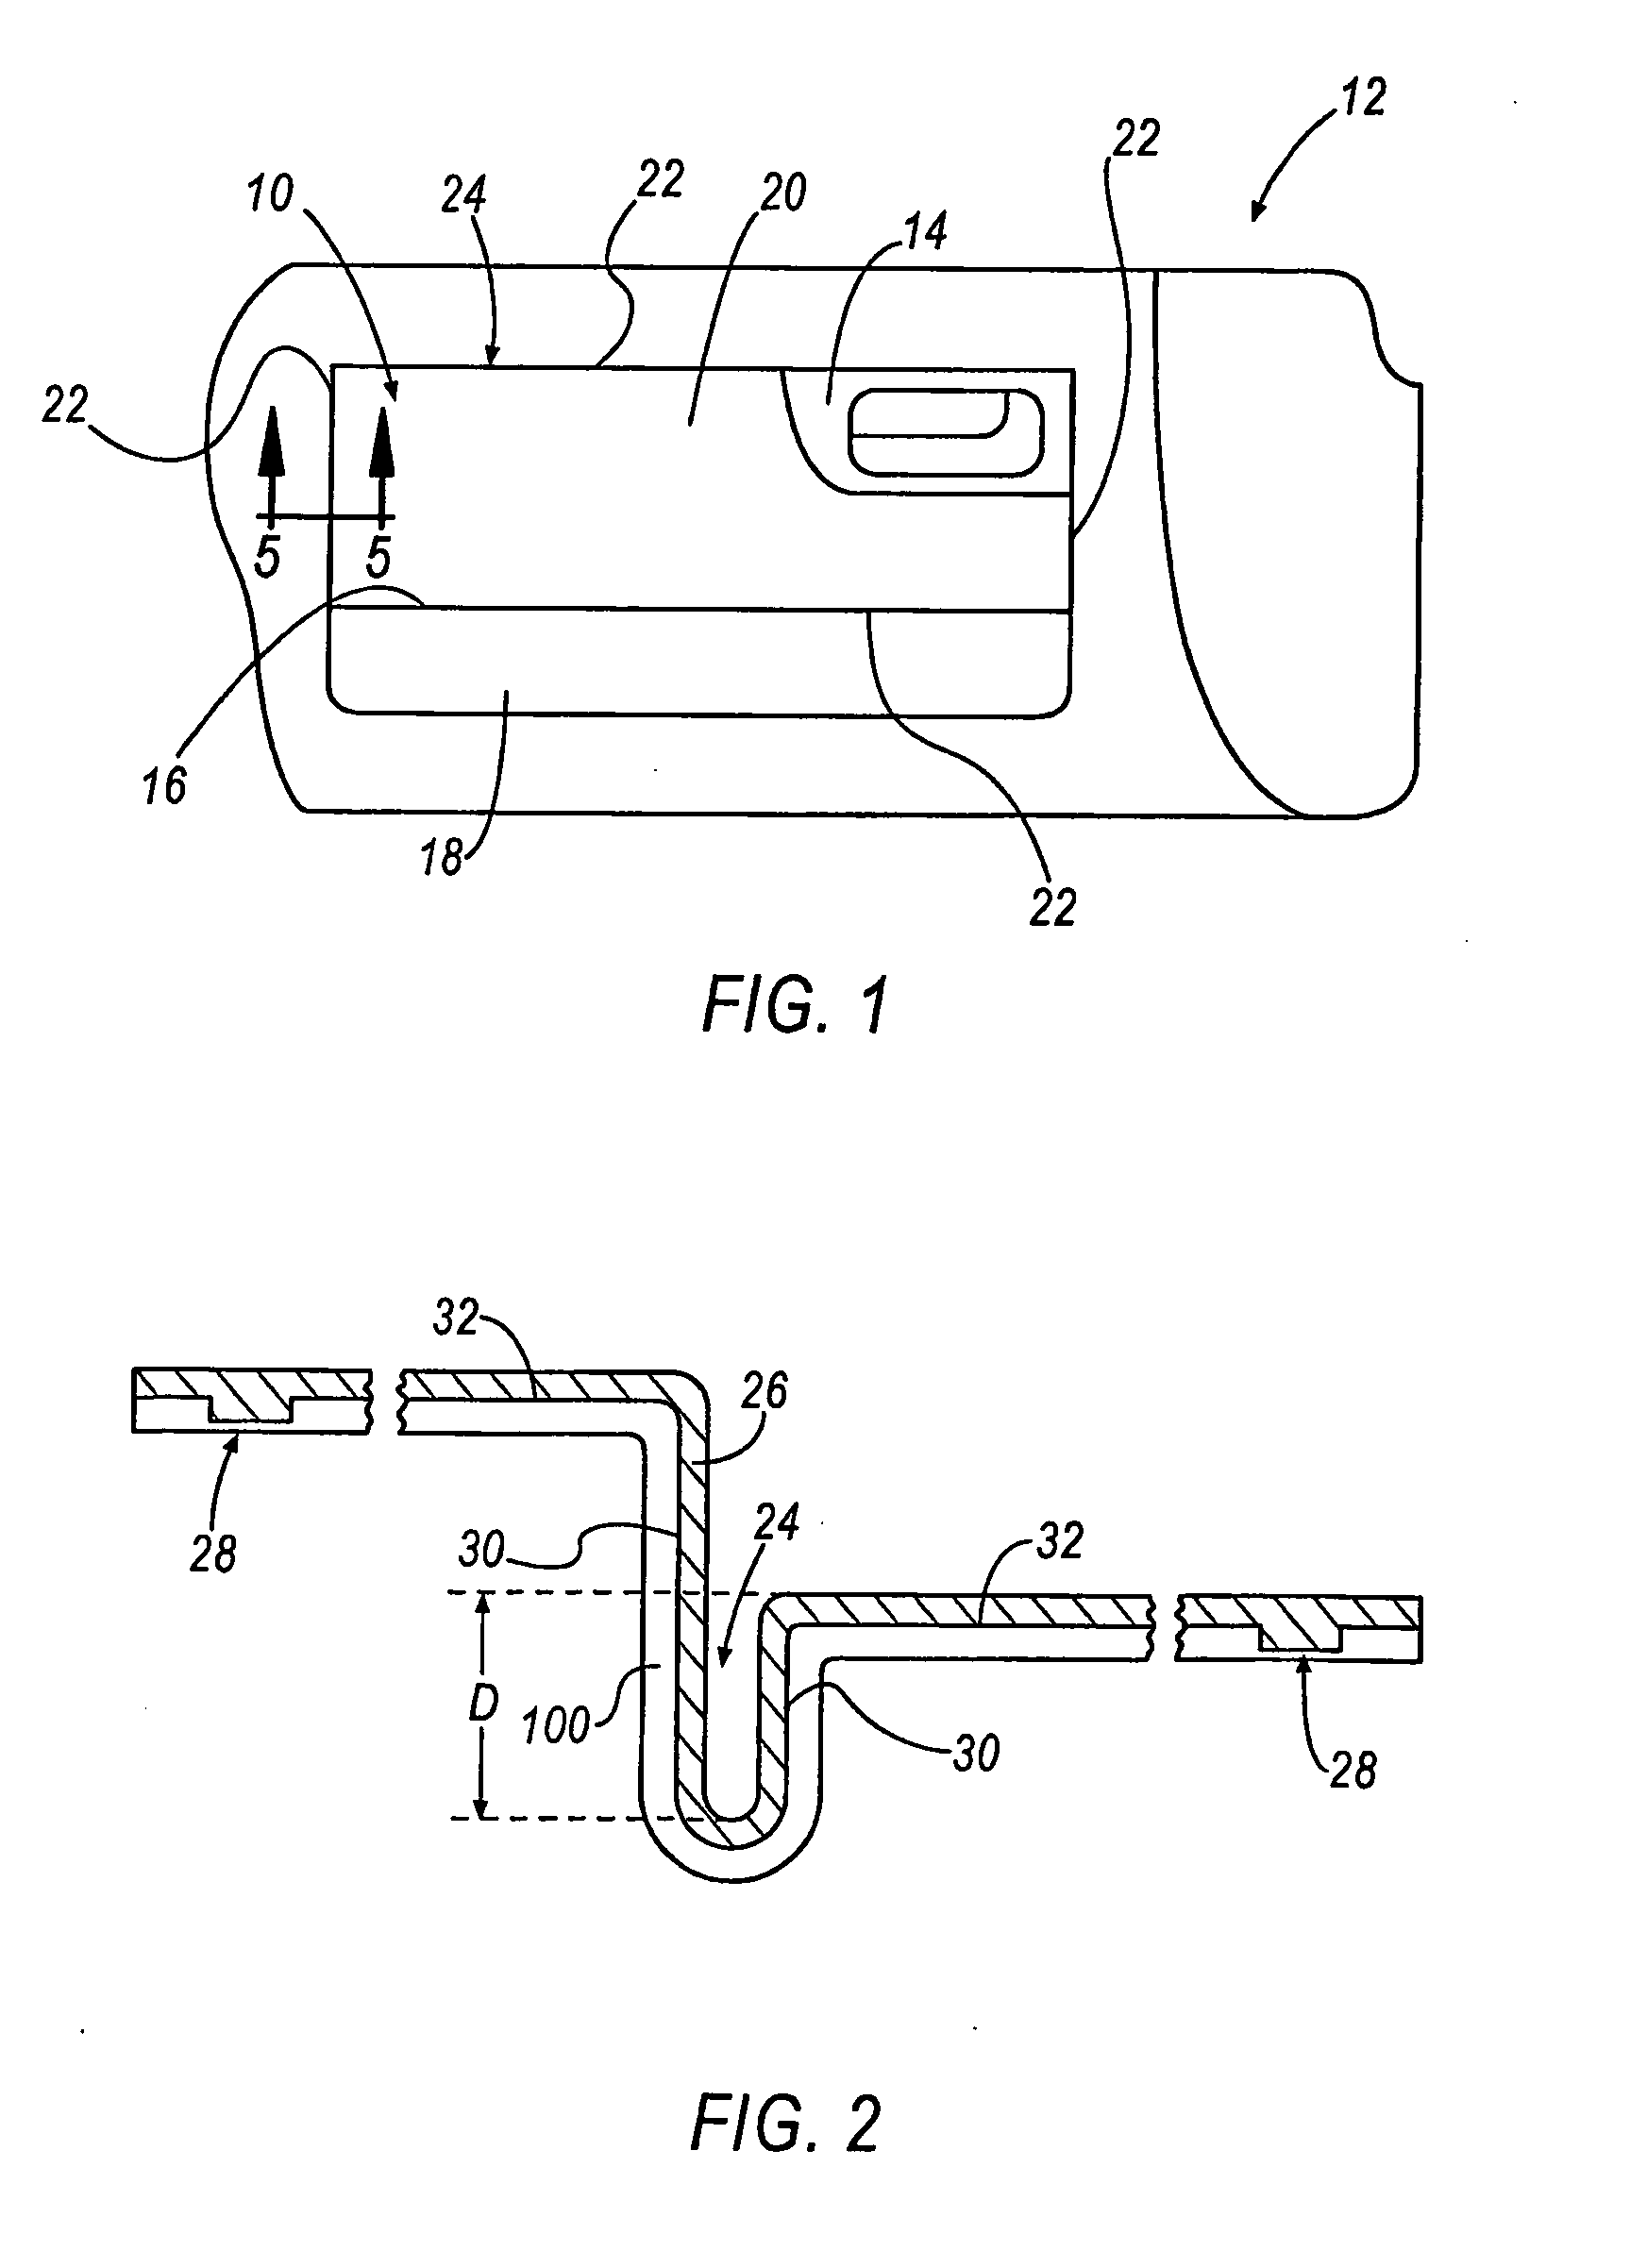 Method of pre-applying a bolster assembly to an interior trim part